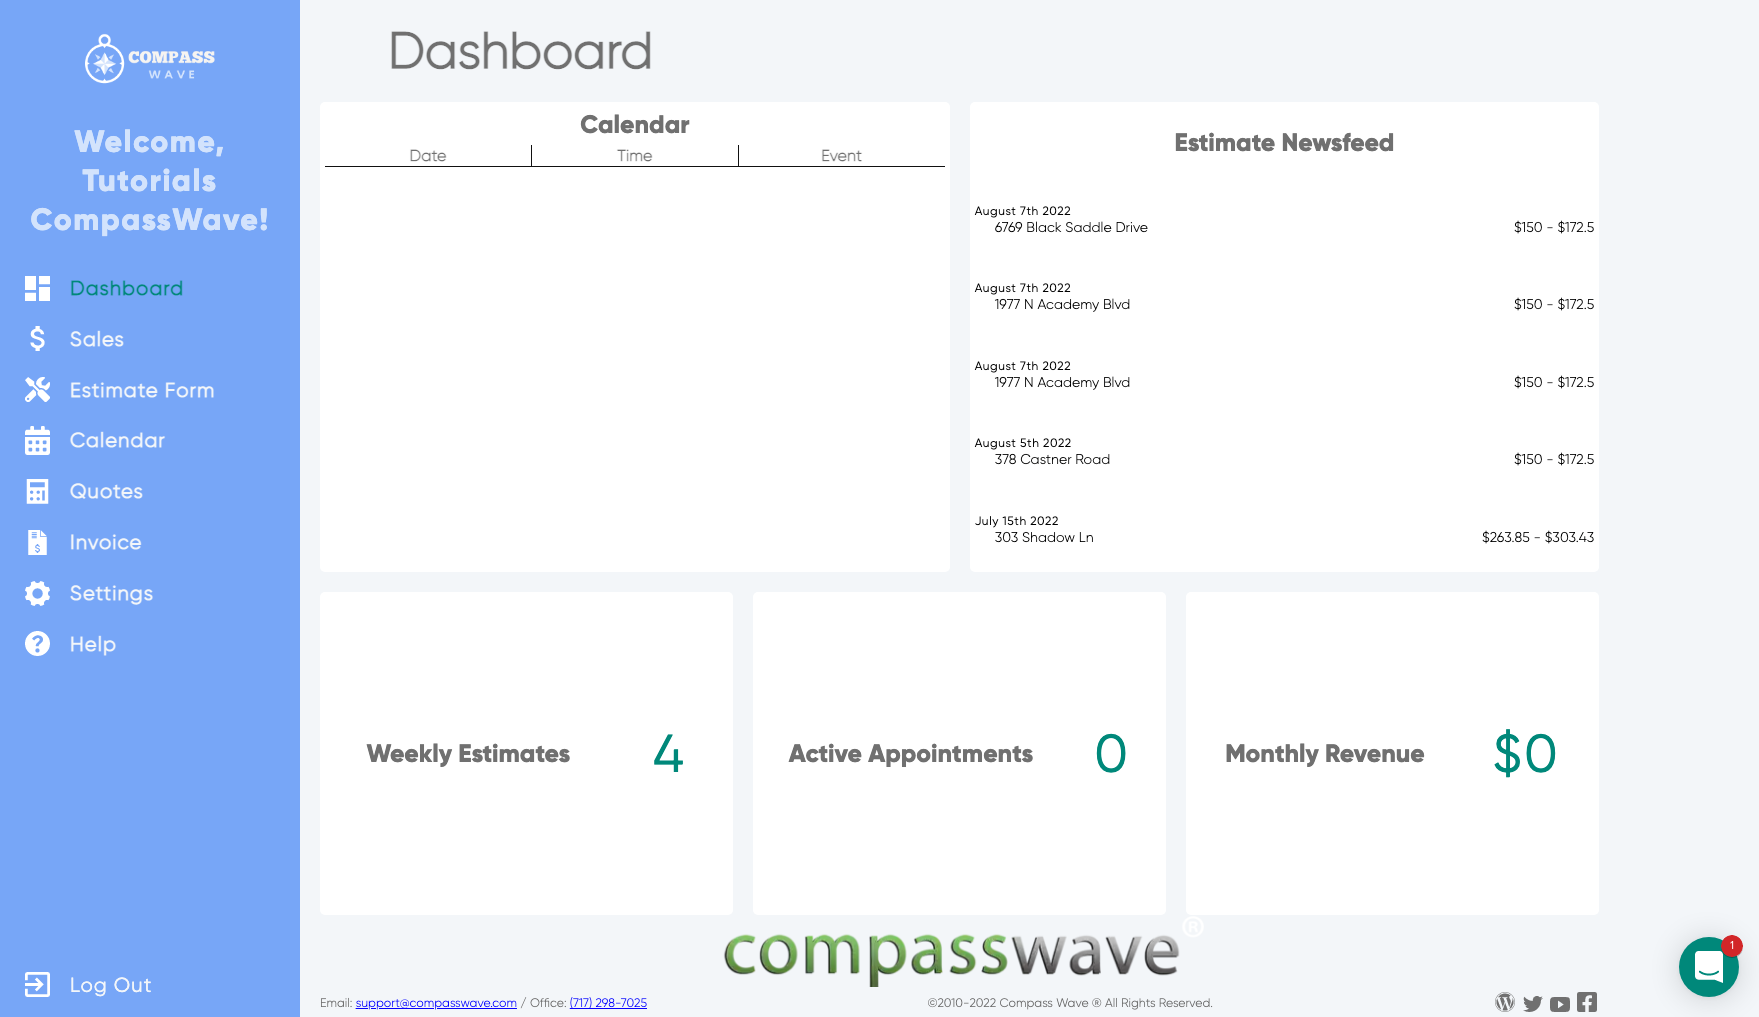 Compass Wave Dashboard - Displaying your recent estimates